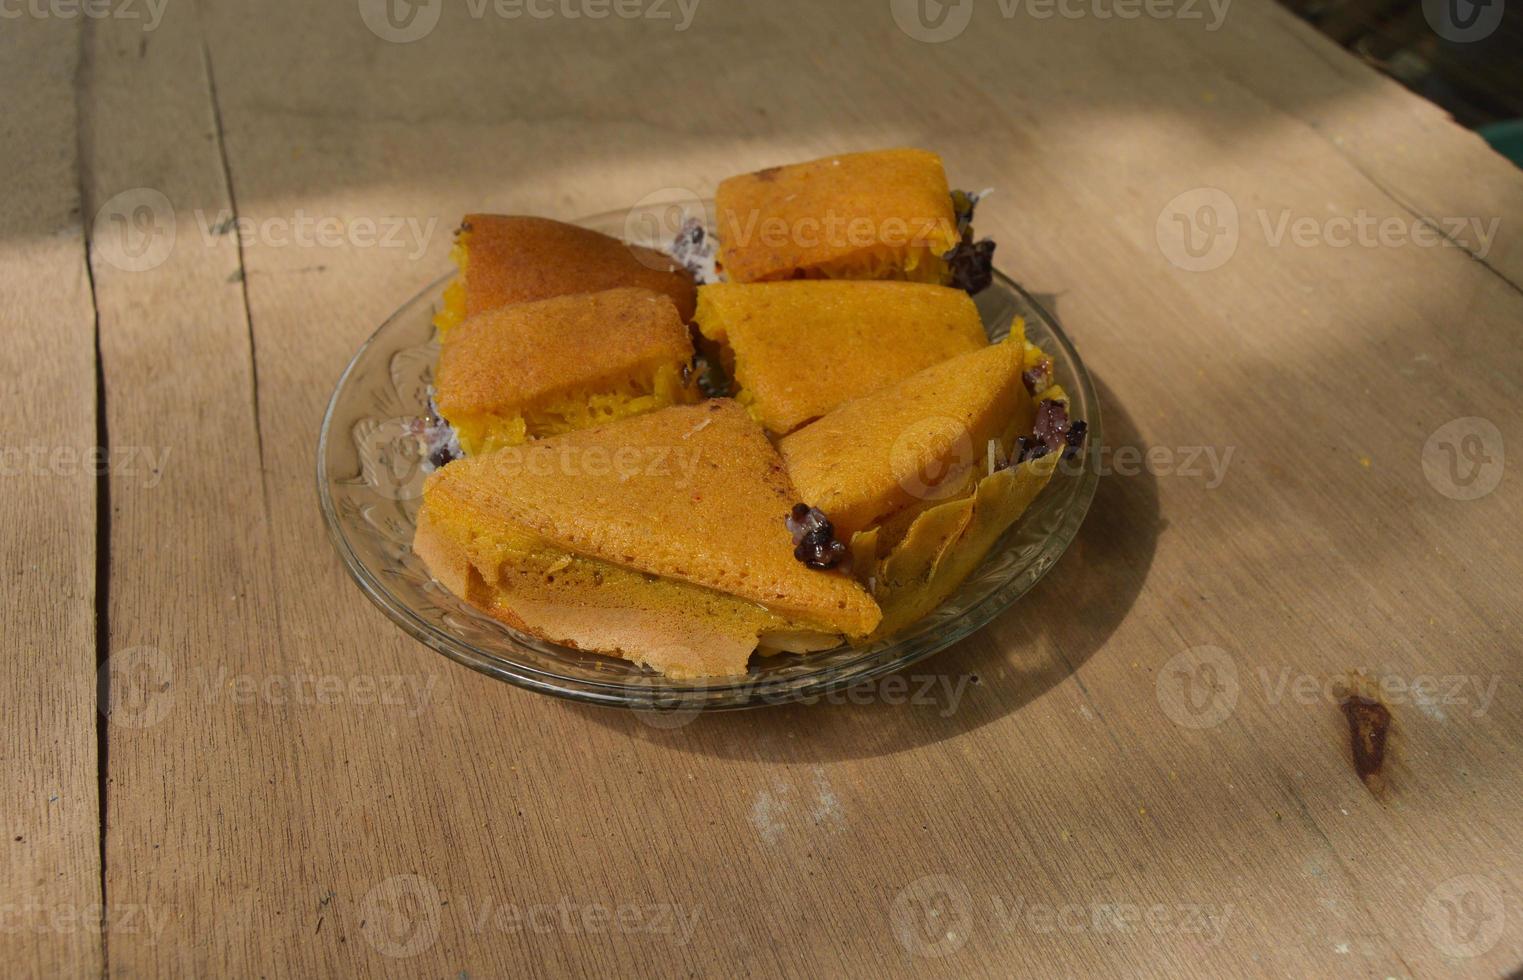 Terang Bulan food made from flour and stuffed with black sticky rice originating from Indonesia. with plates and wooden background. photo